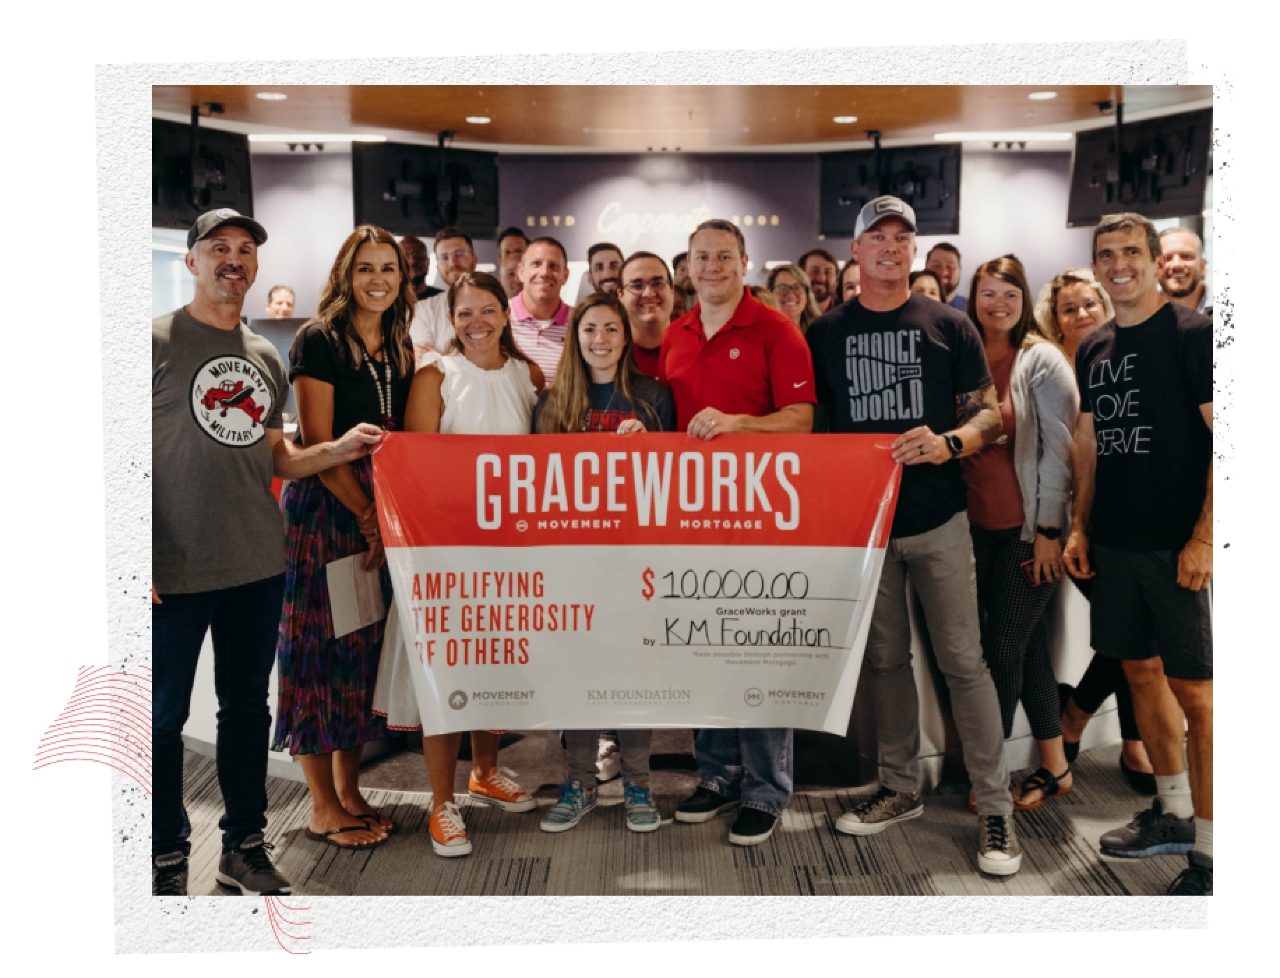 Group of people smiling holding a banner with a grant for GraceWorks